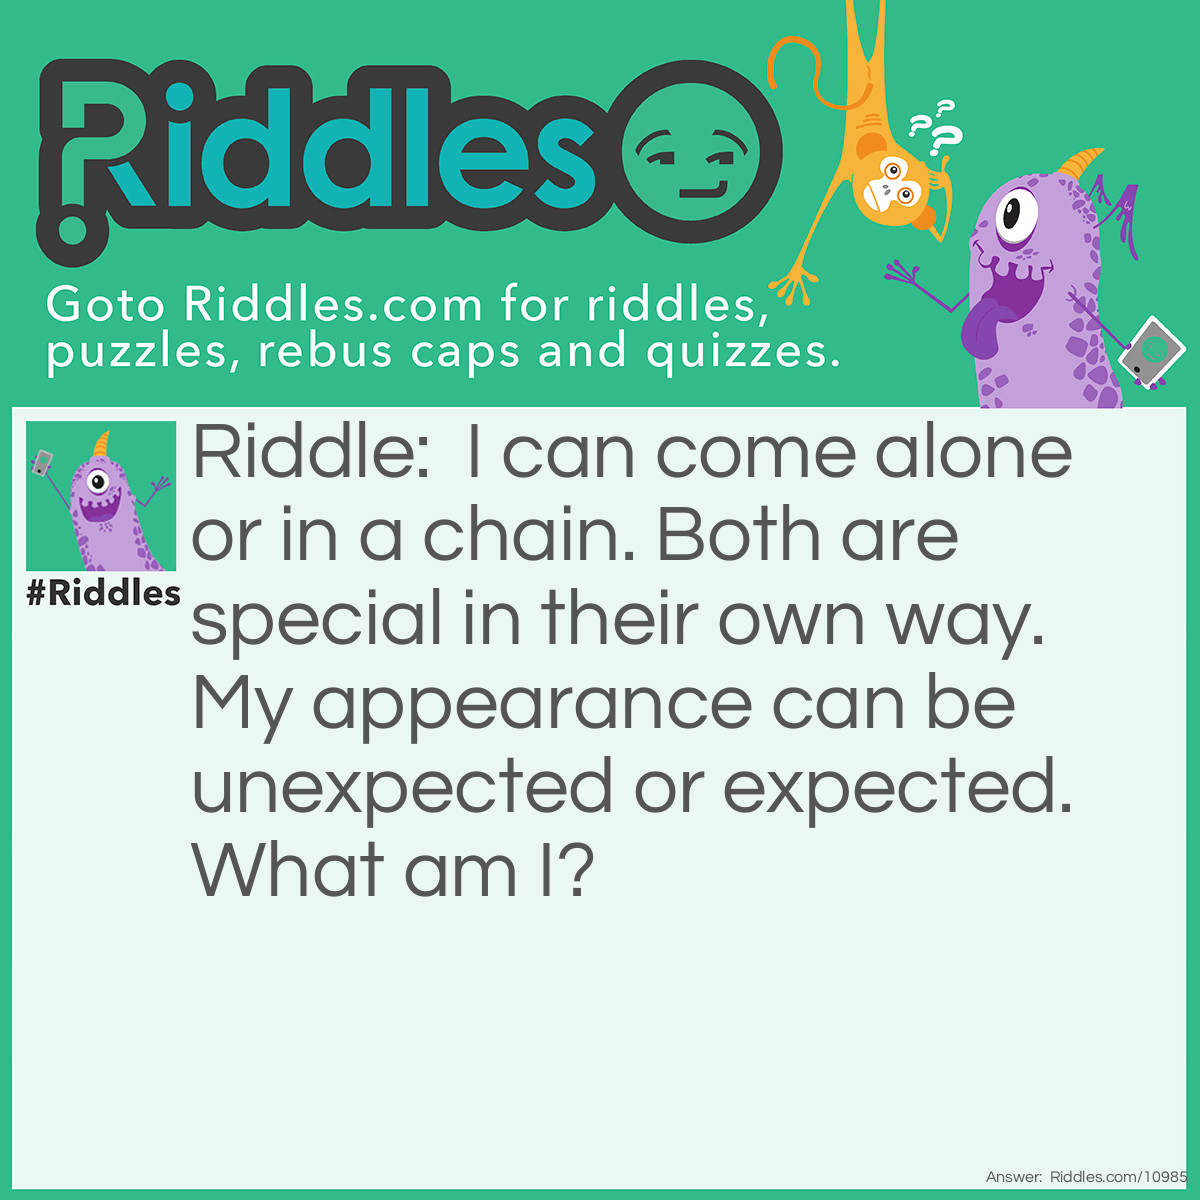 Riddle: I can come alone or in a chain. Both are special in their own way. My appearance can be unexpected or expected. What am I? Answer: A (Chain) Reaction.